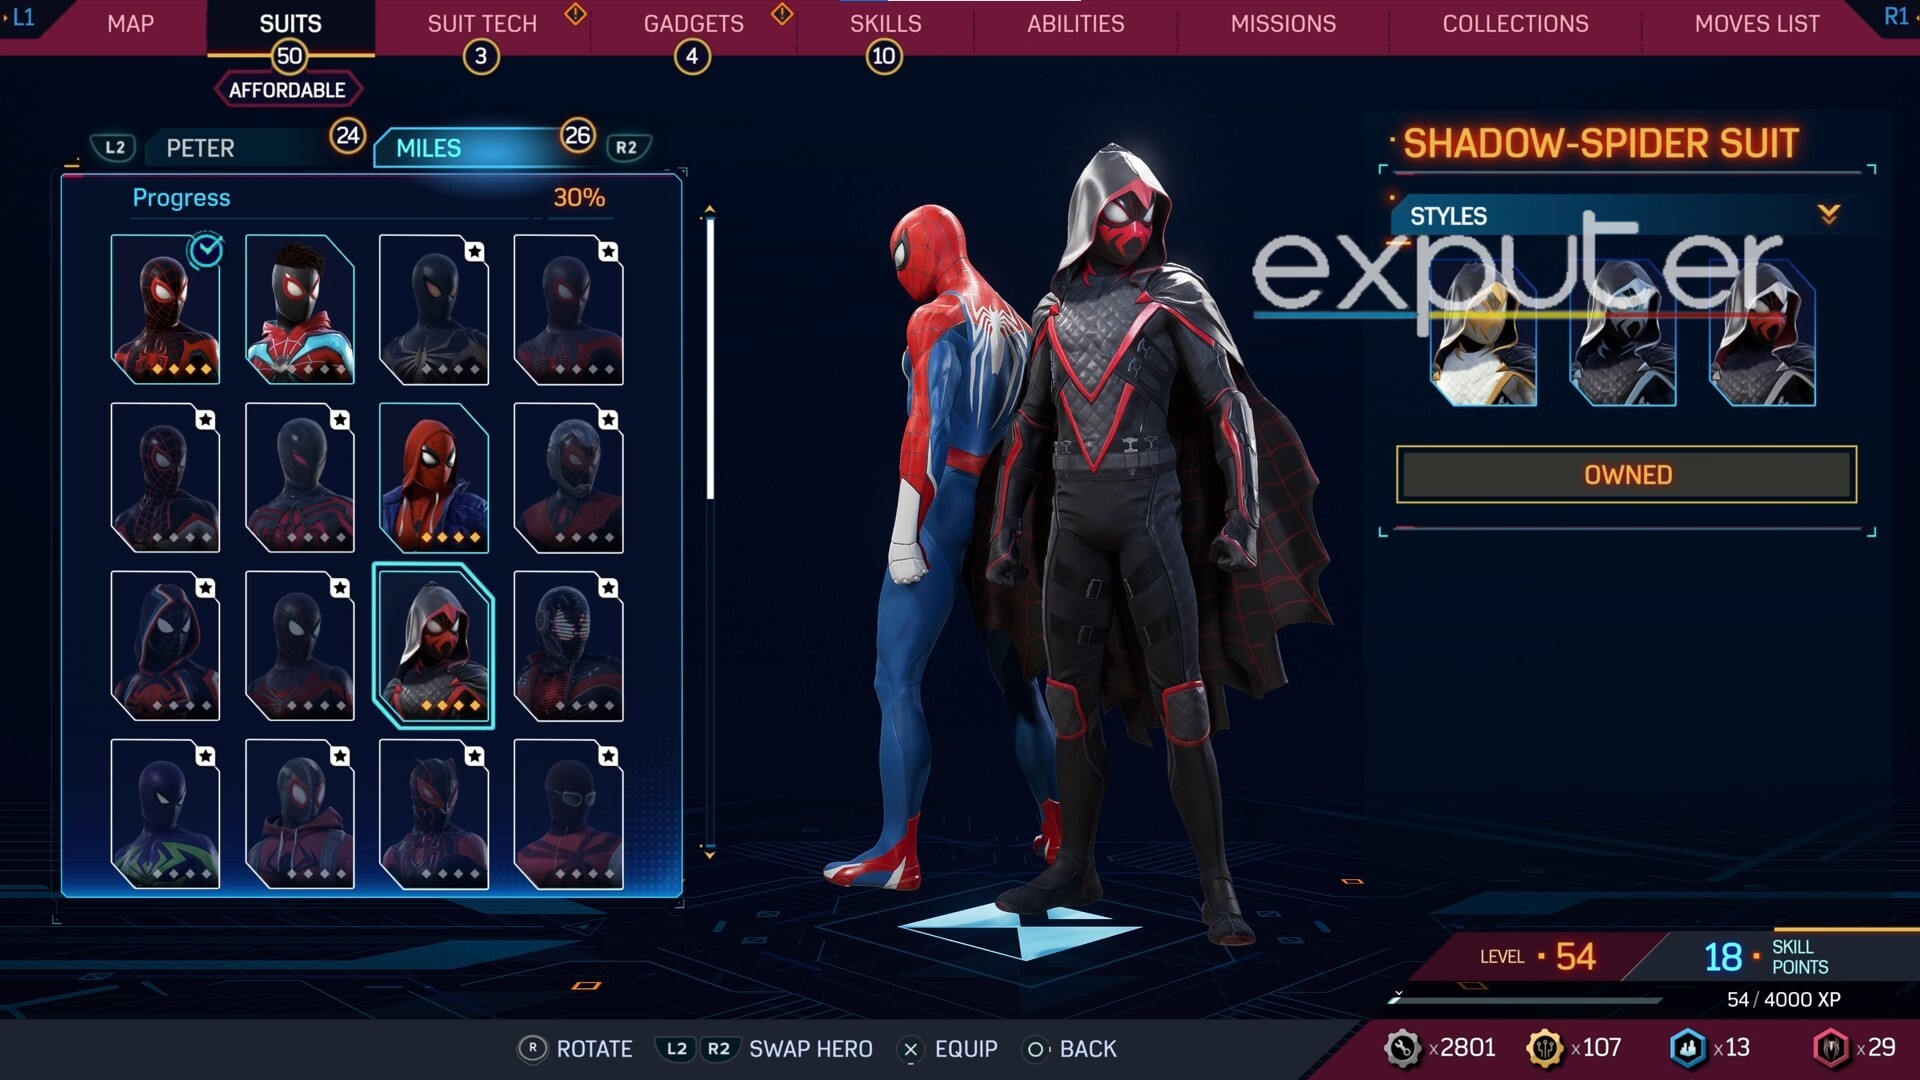 Shadow-Spider Suit In Game